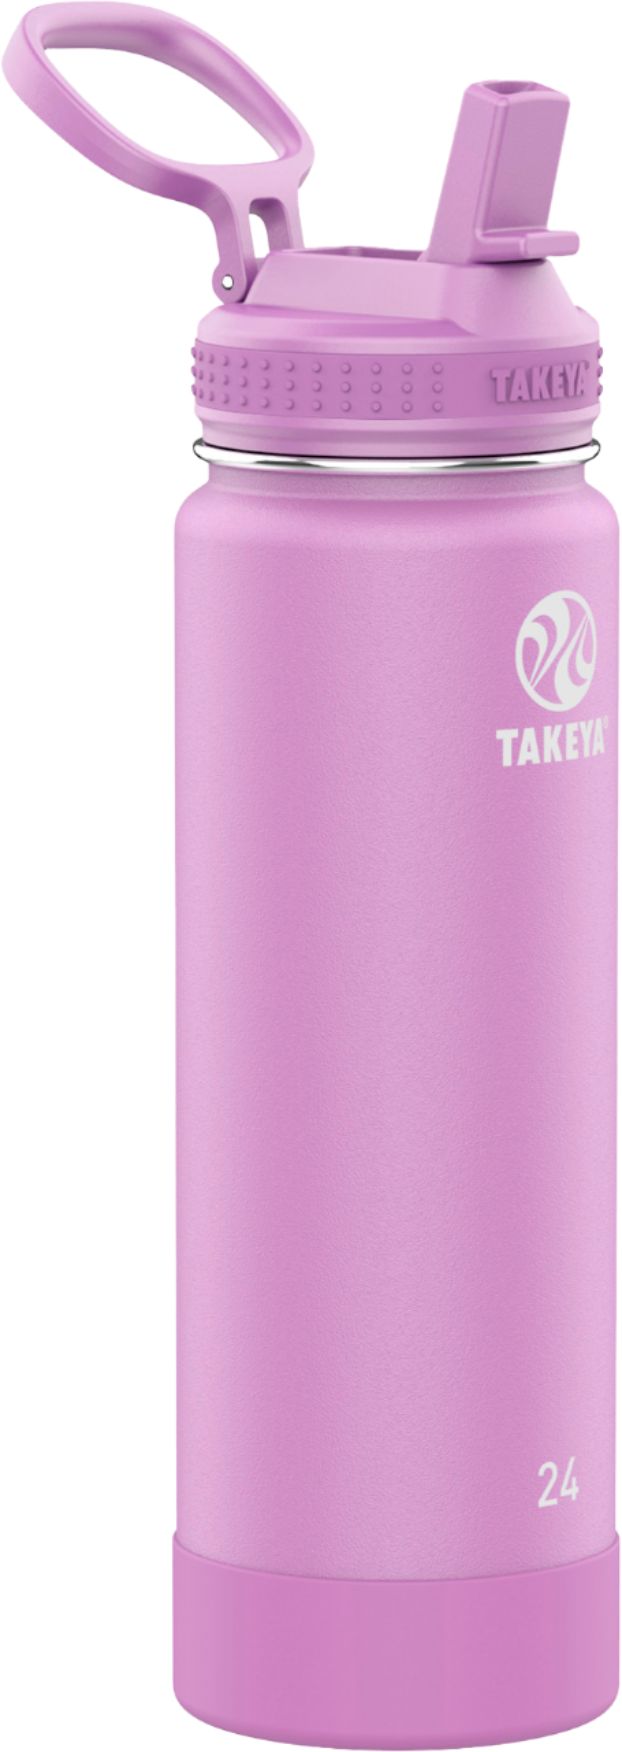 Takeya Actives 24 oz. Midnight Insulated Stainless Steel Water Bottle with Straw Lid, Black